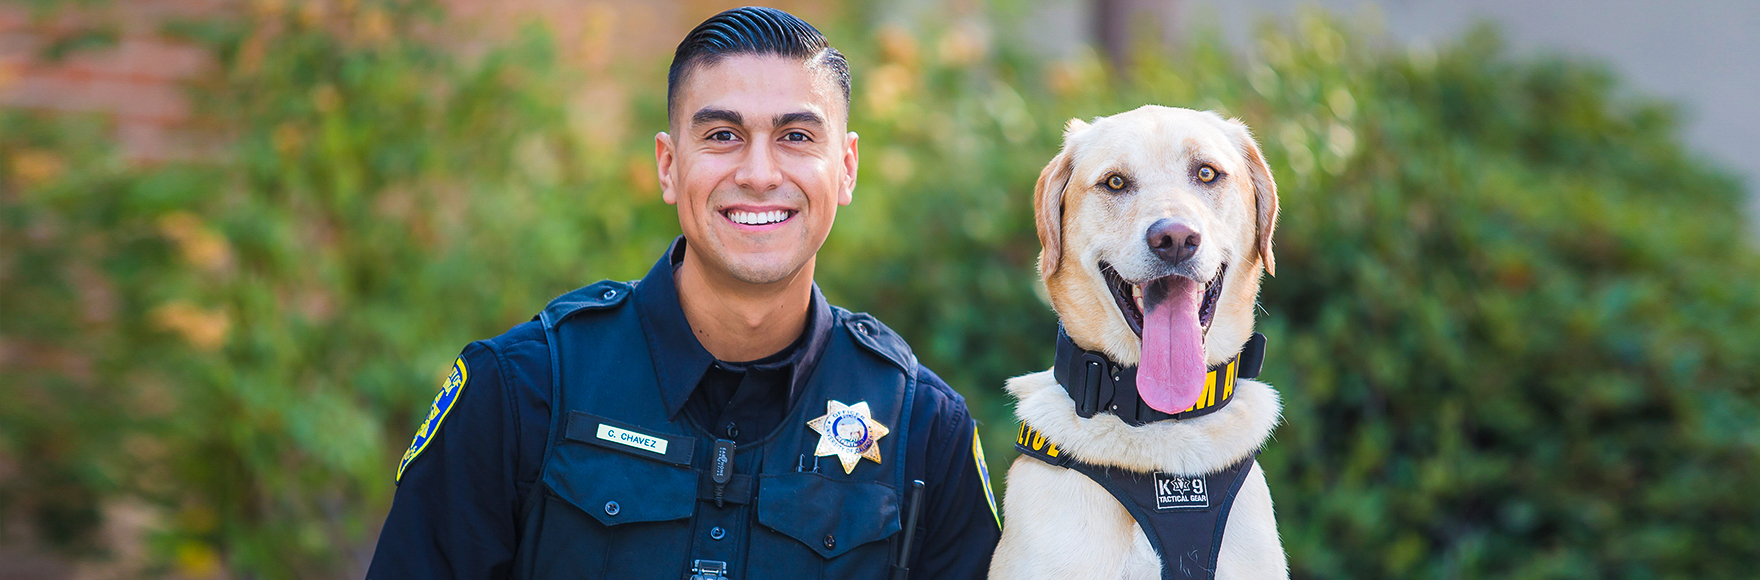 Officer Chavez smiles with K-9 Max